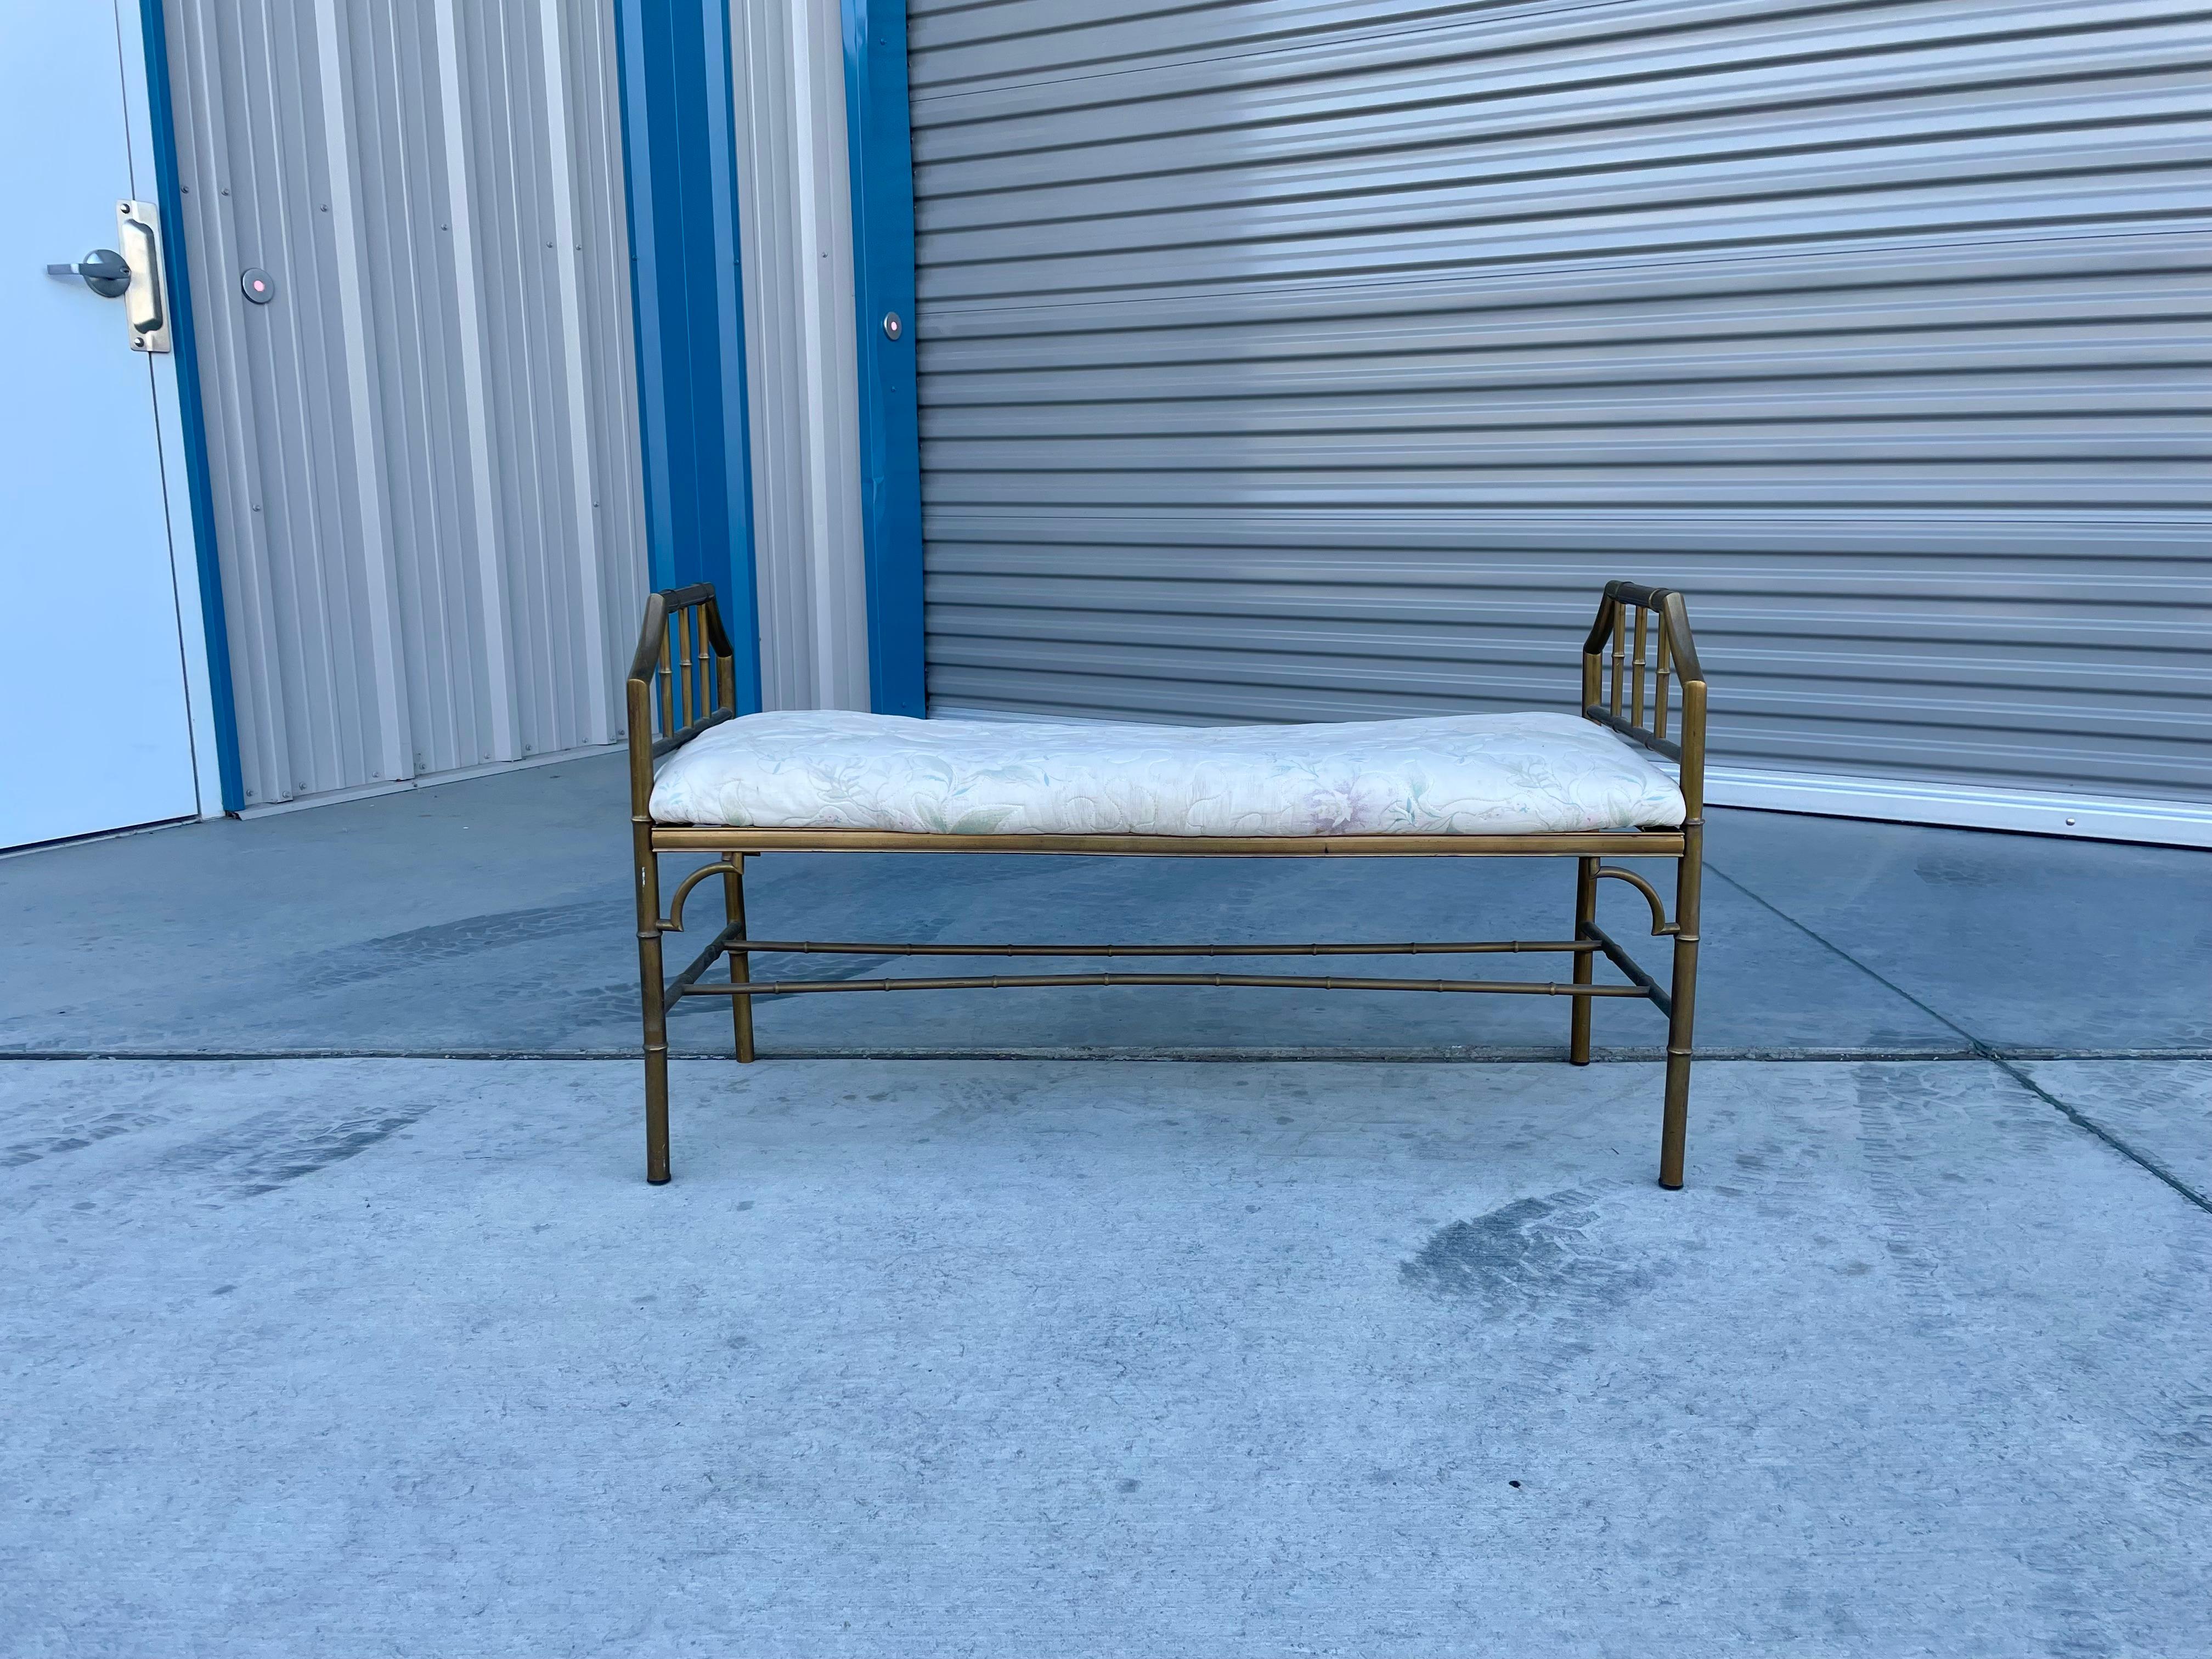 Vintage brass bamboo style bench designed and manufactured in the United States in the 1950s.This beautiful bench showcases a unique design with its bamboo-style frame that gives it a vintage and forest-like shape. Moreover, the bench boasts a